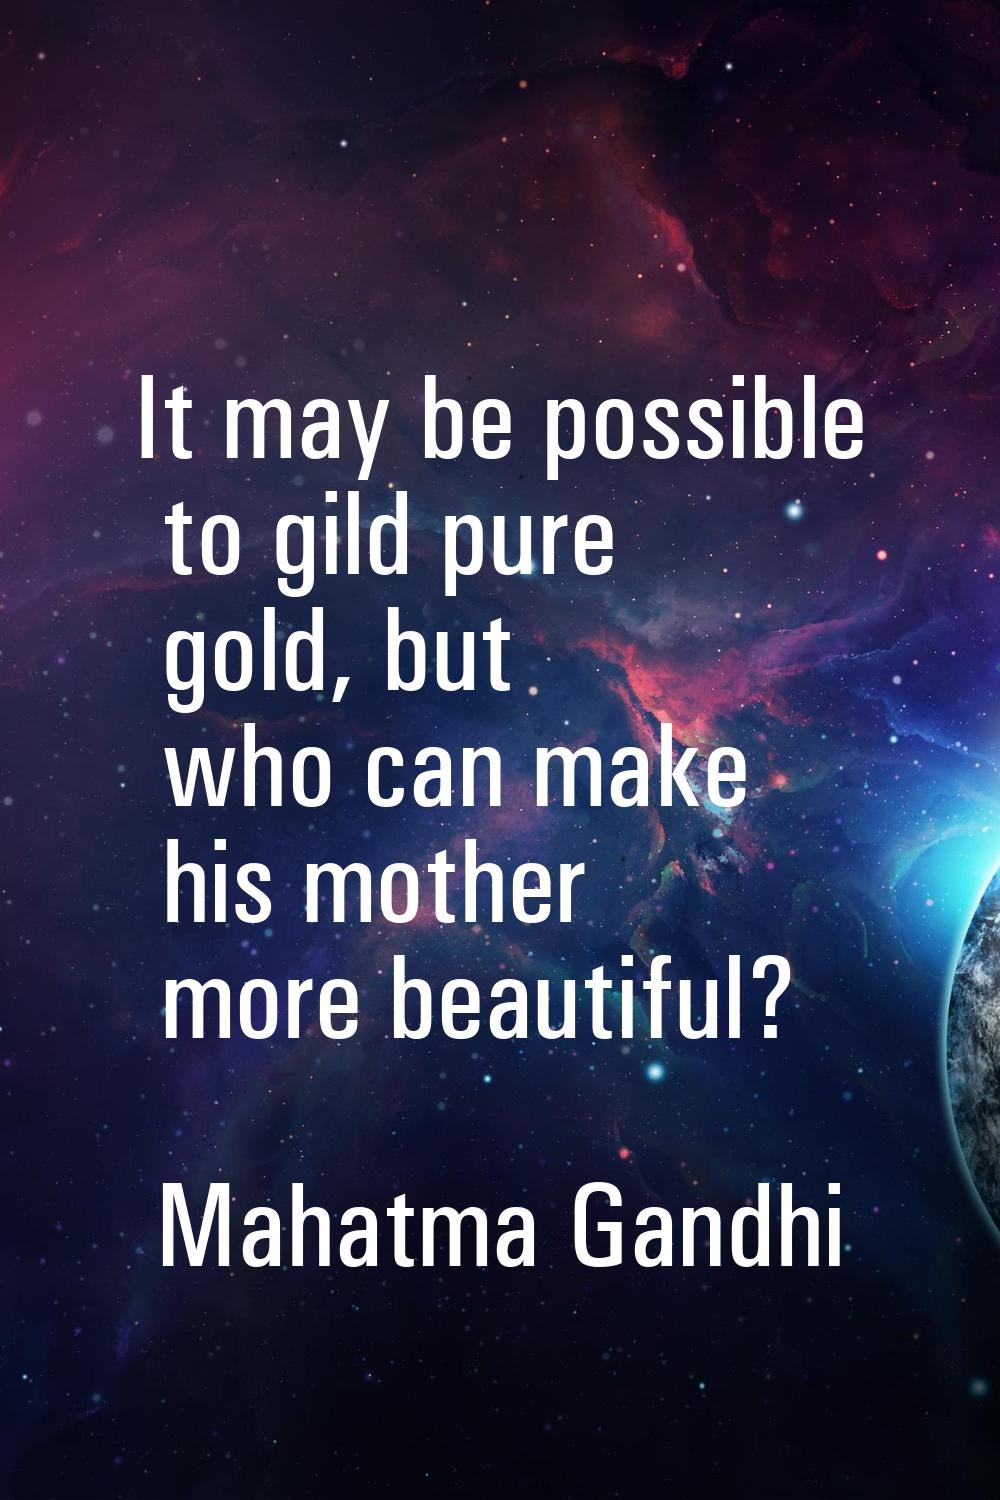 It may be possible to gild pure gold, but who can make his mother more beautiful?